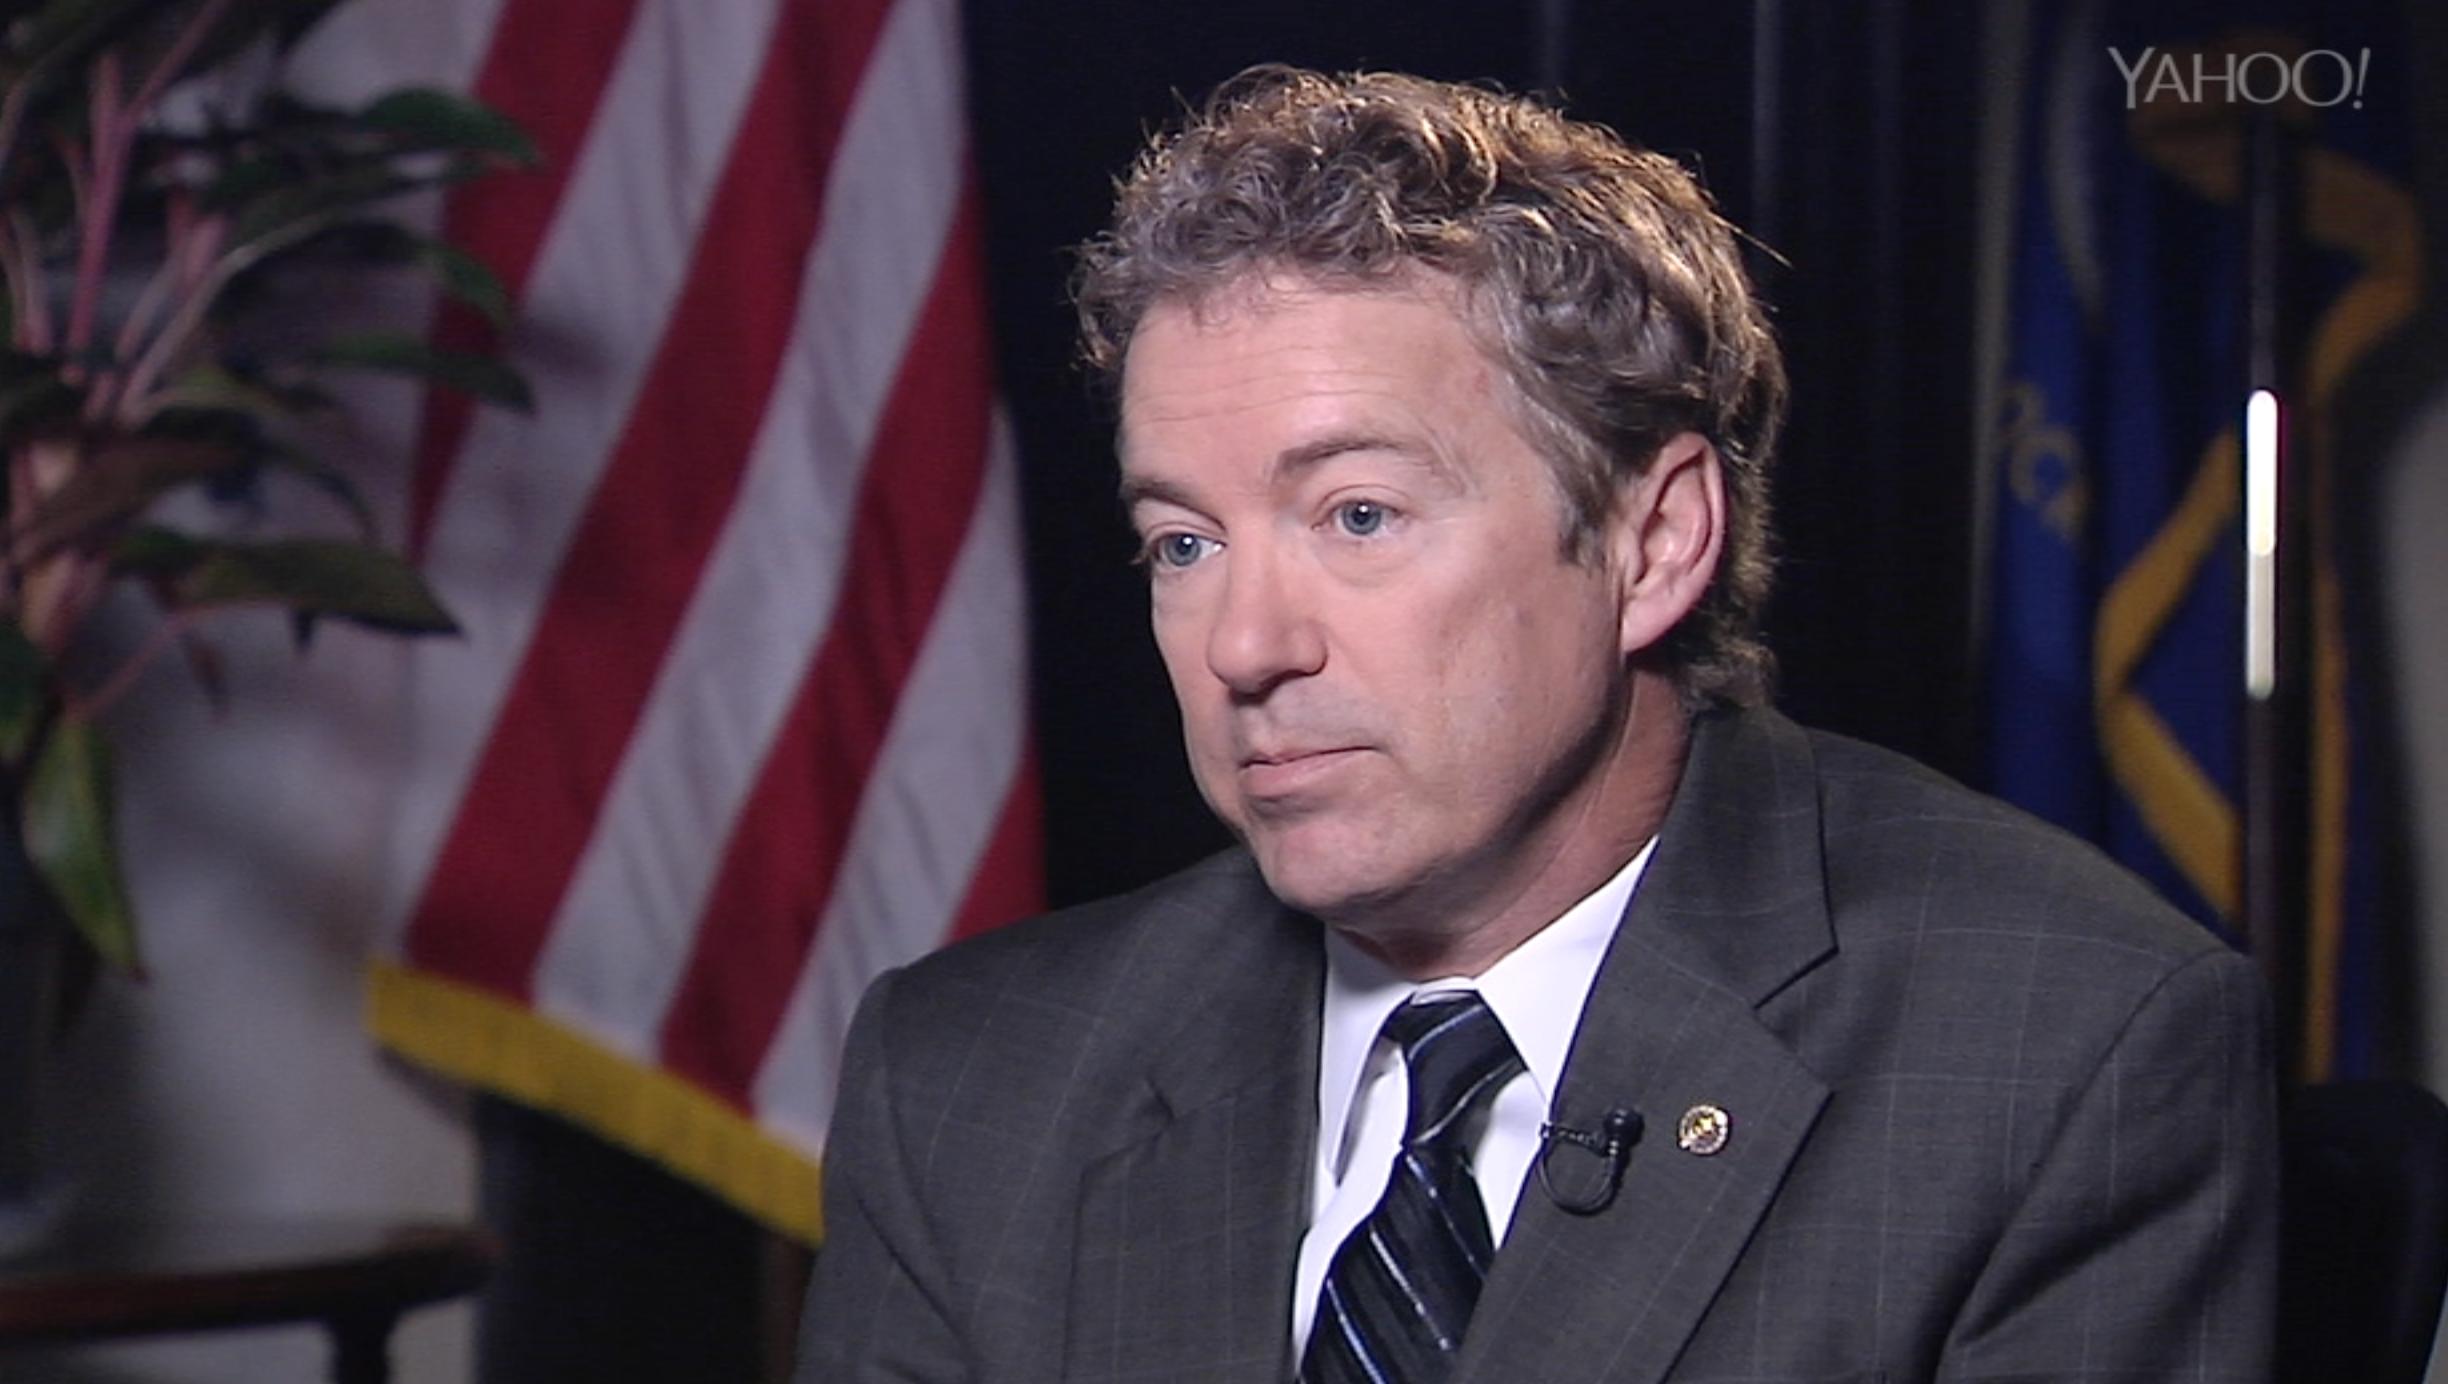 Senator Rand Paul slams Hillary Clinton in interview with Katie Couric